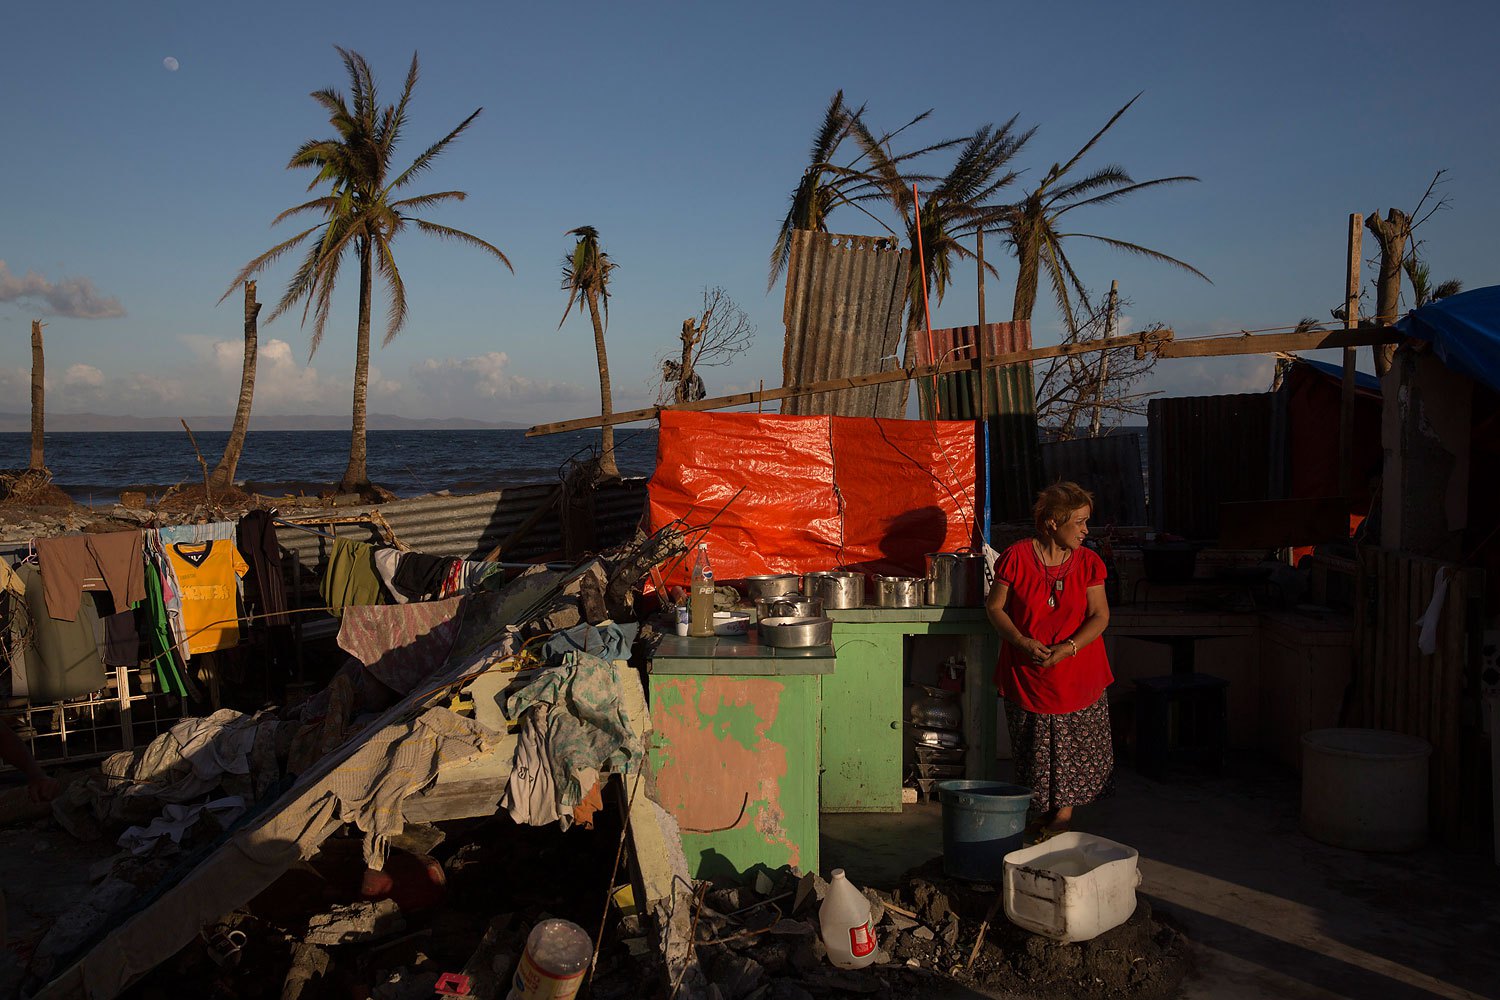 A woman stands in the kitchen of her home destroyed by Typhoon Haiyan in Tanuan, Philippines on November 15, 2013.